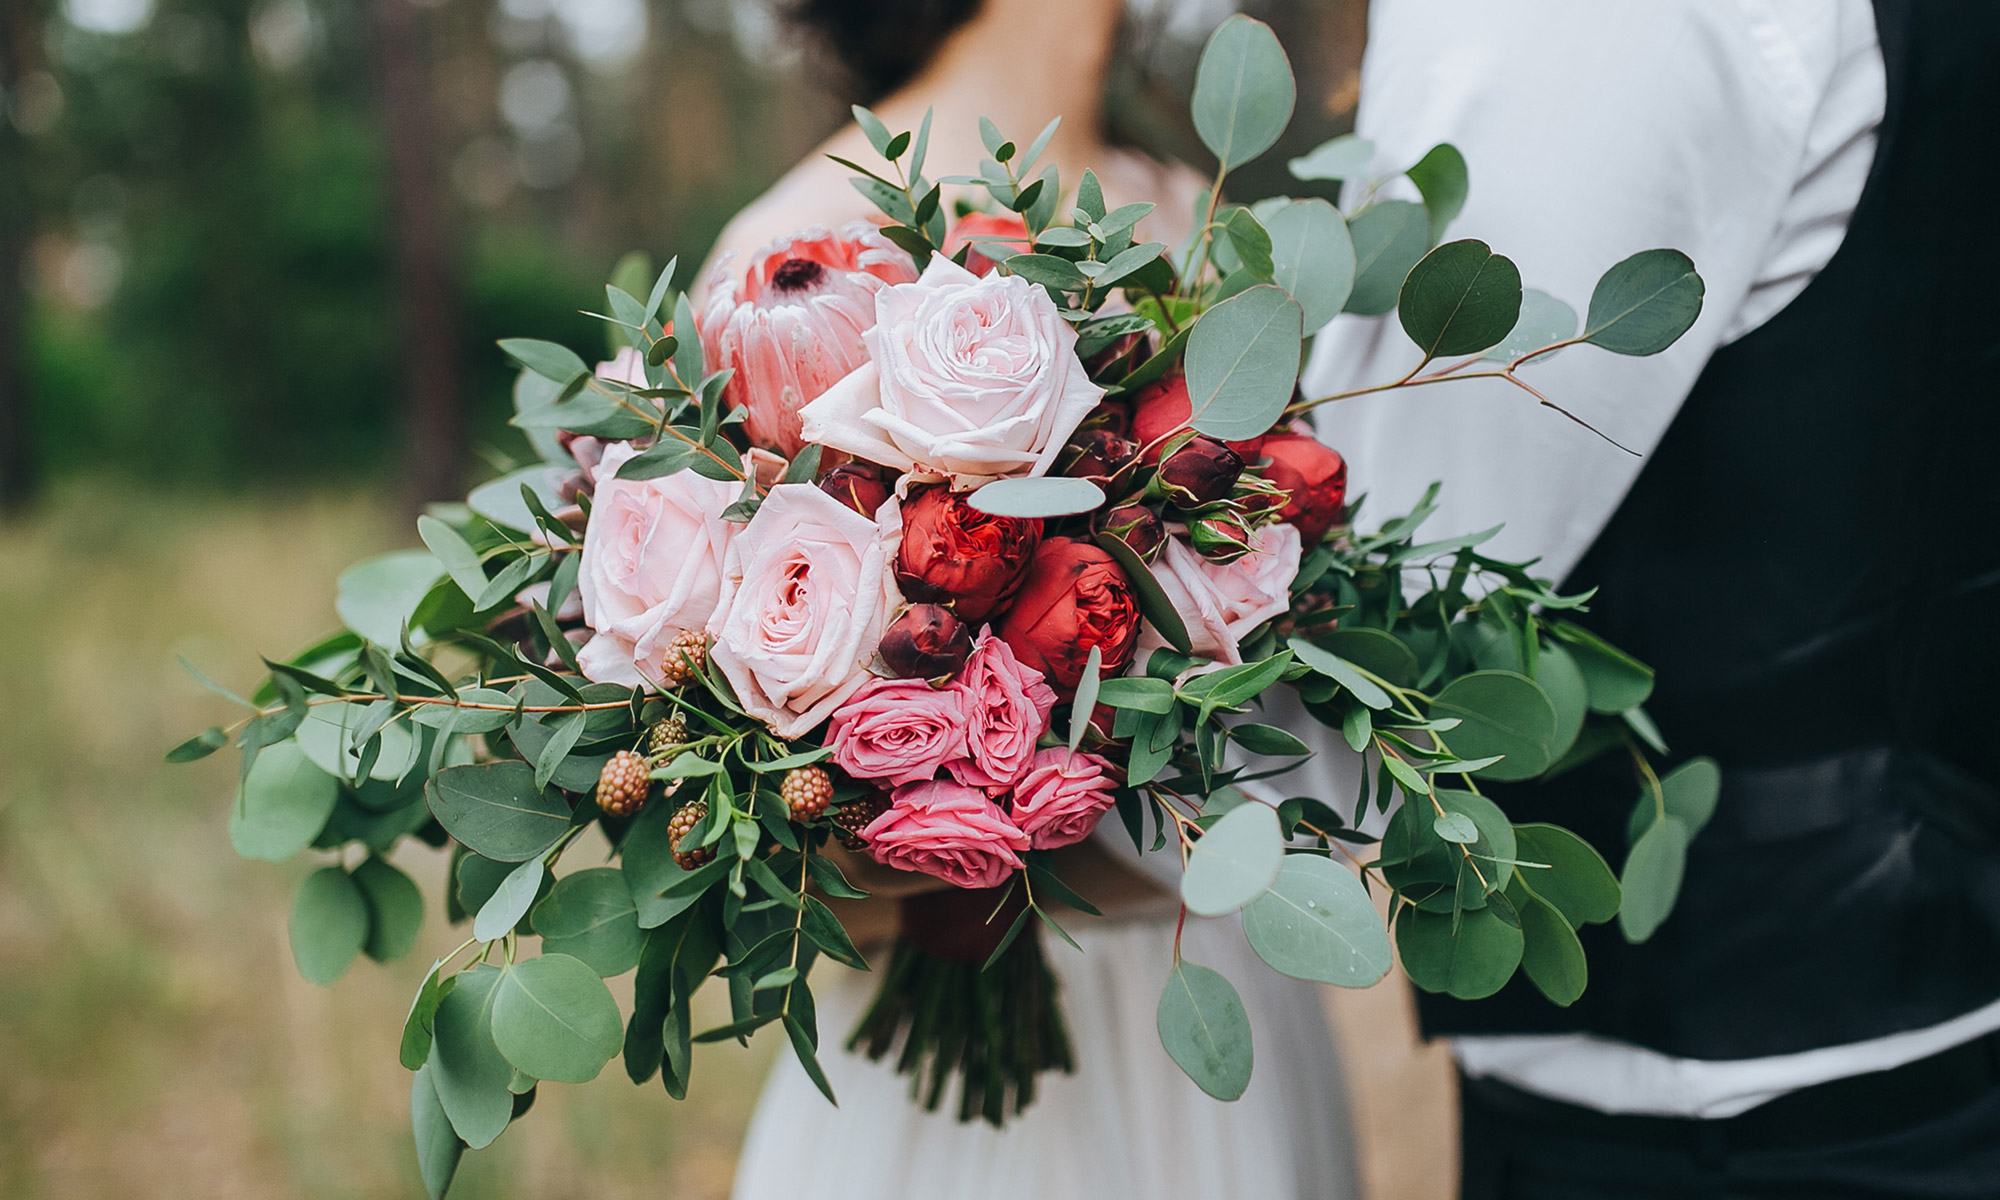 Nontraditional Floral Trends for Your Wedding Centerpieces